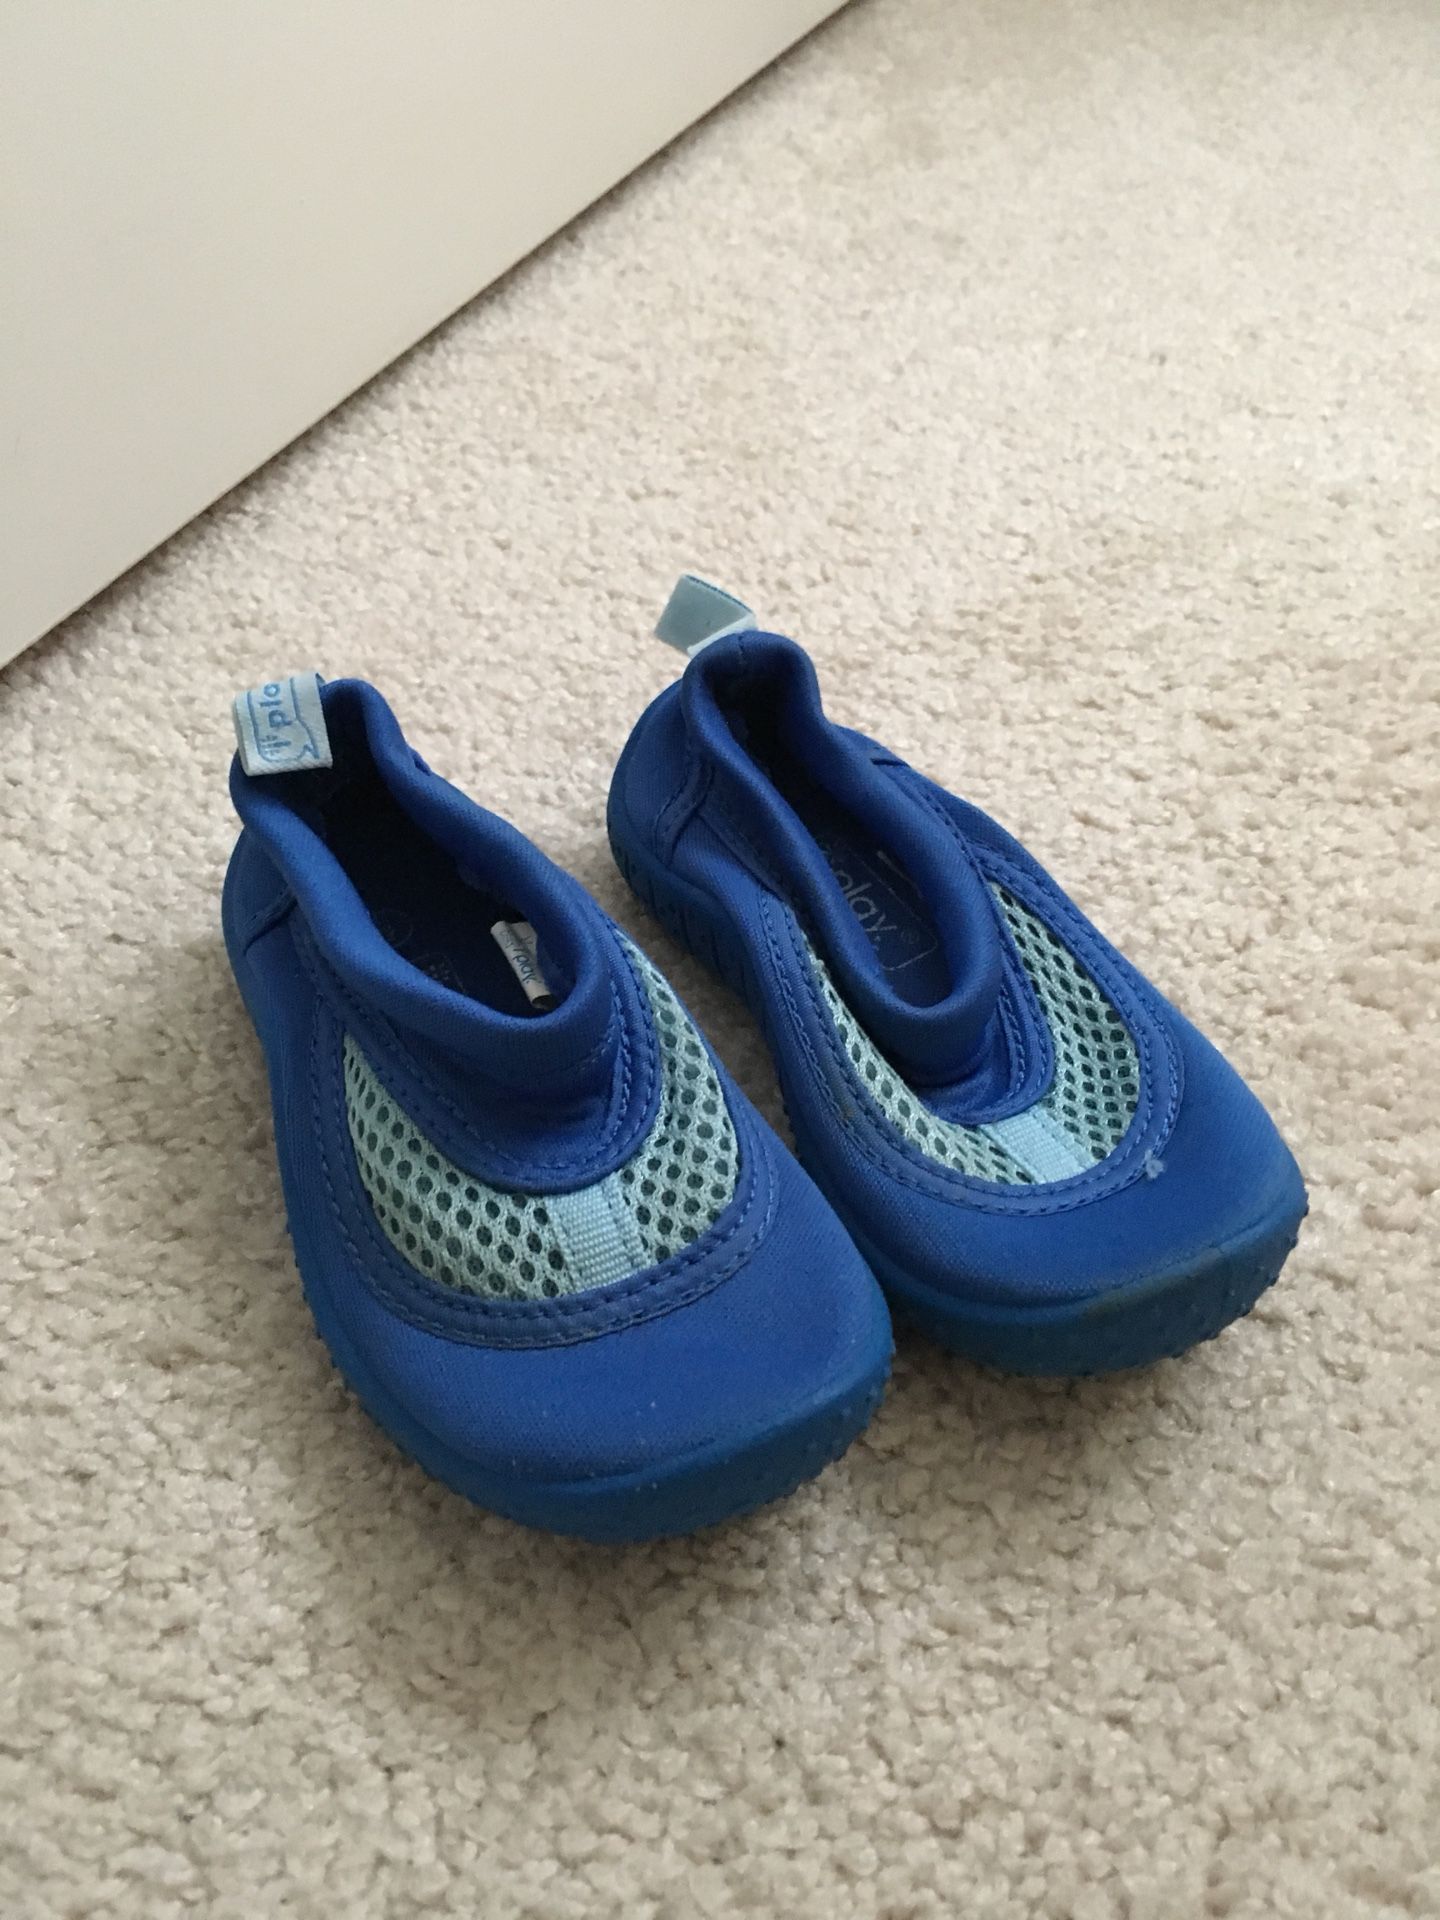 iPlay toddler water shoes - size 6